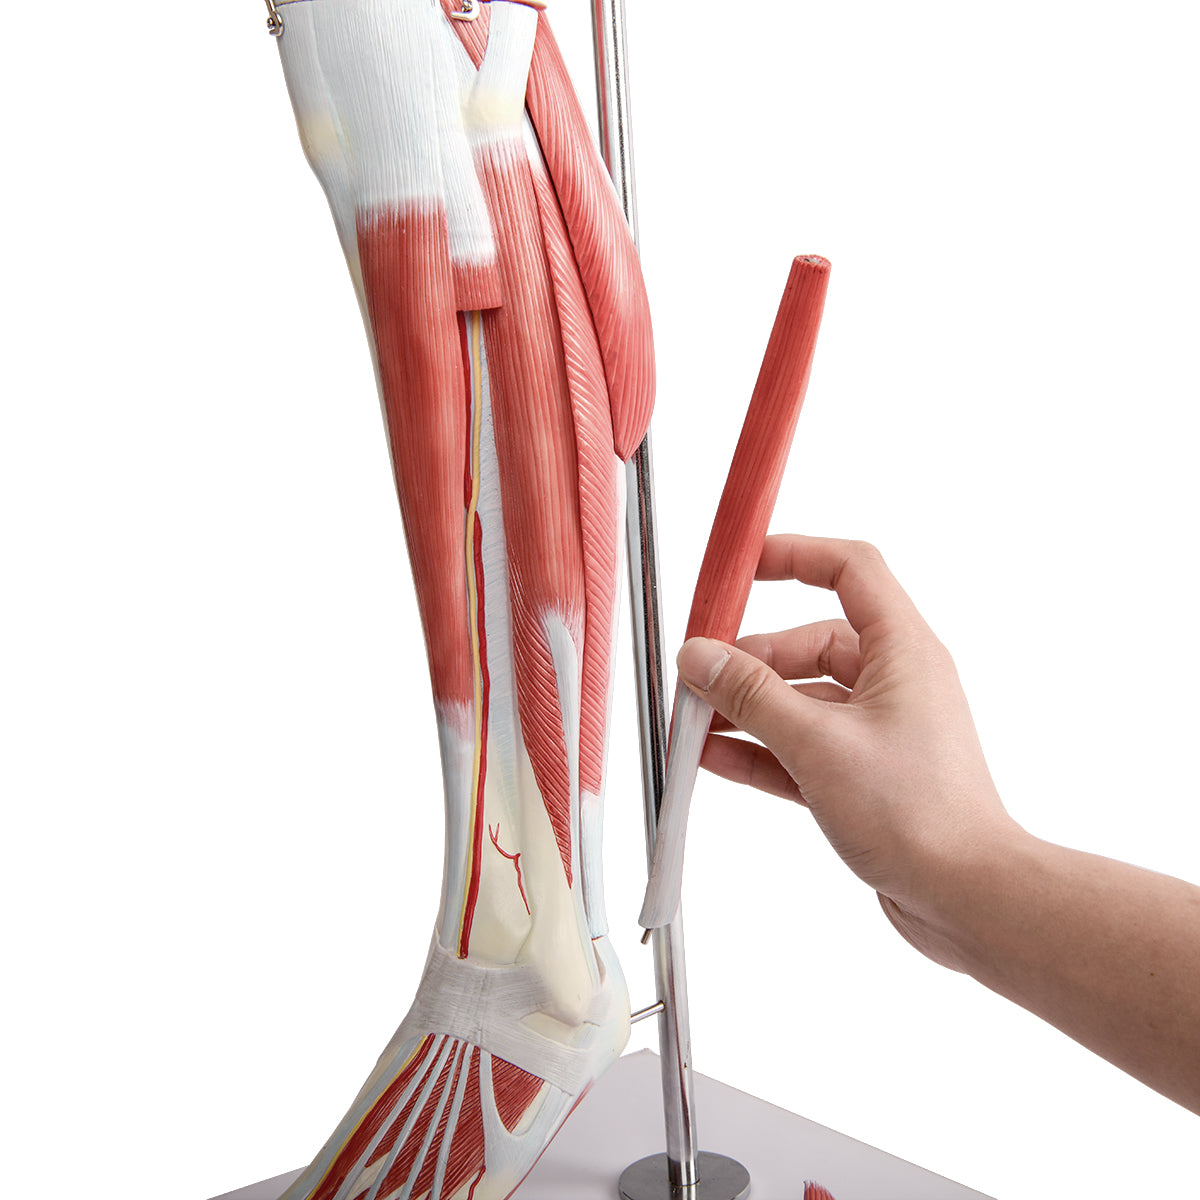 Evotech Scientific Human Muscular Leg with Detachable Muscles Anatomy Model, Life Size, 14 Parts